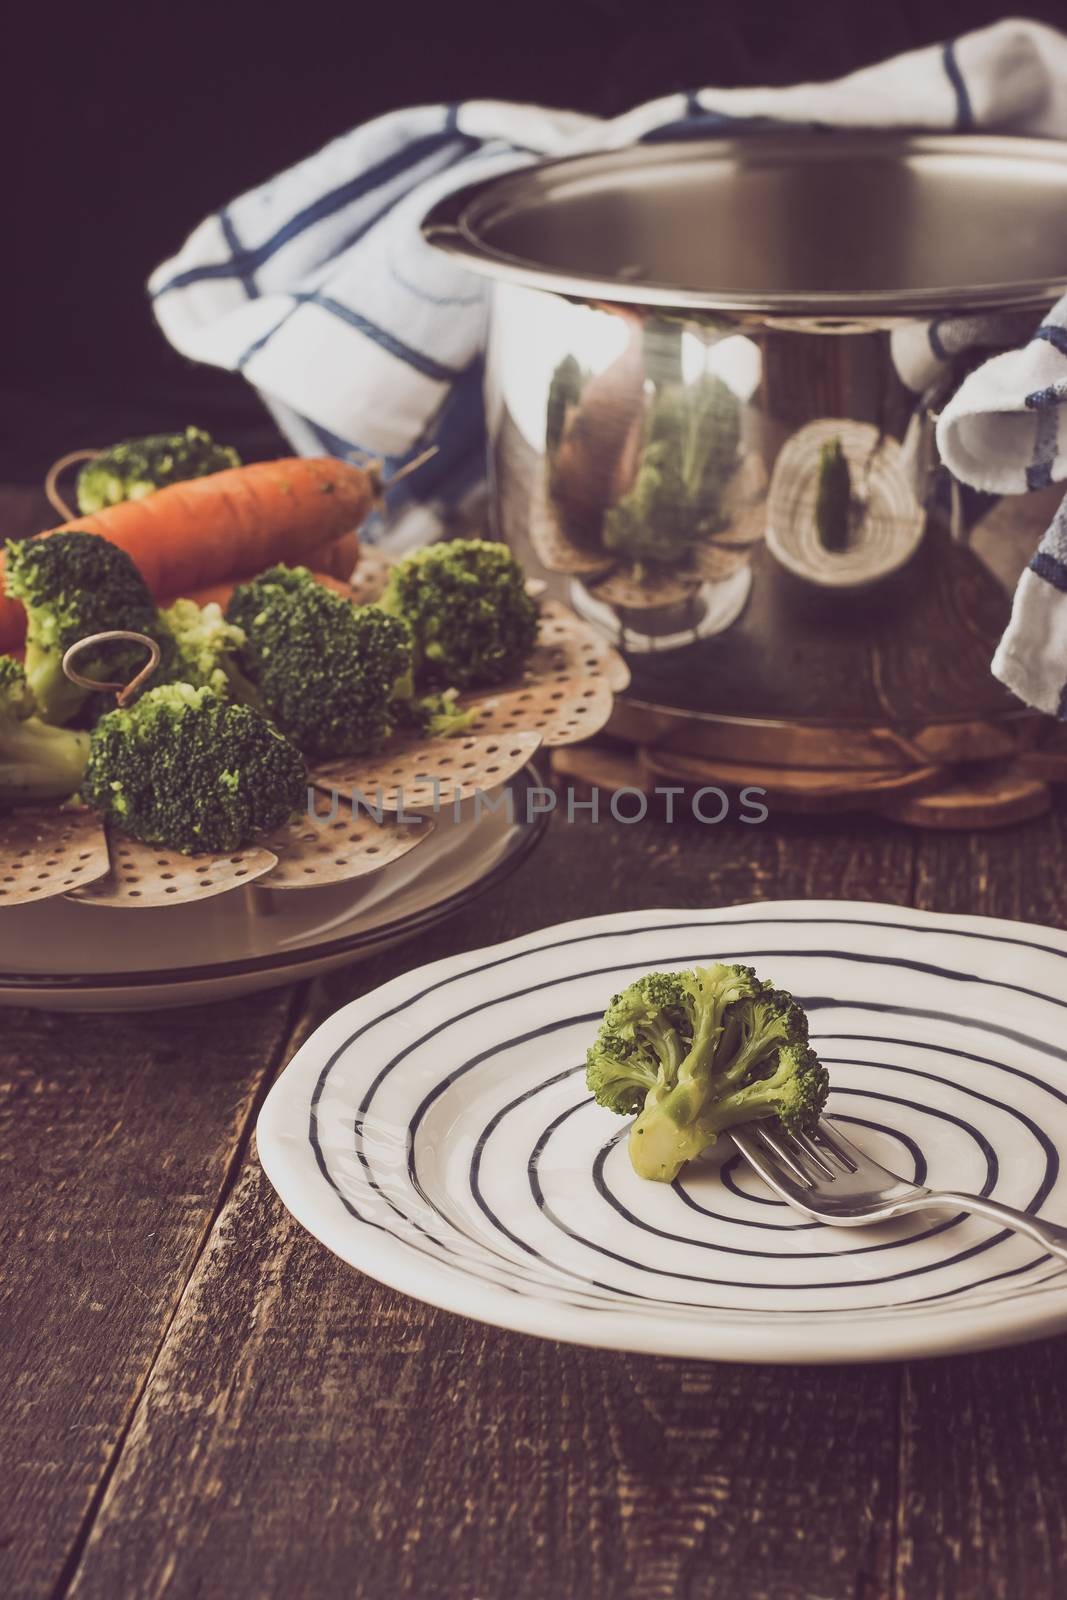 Steamed vegetables with broccoli on a fork on the wooden table